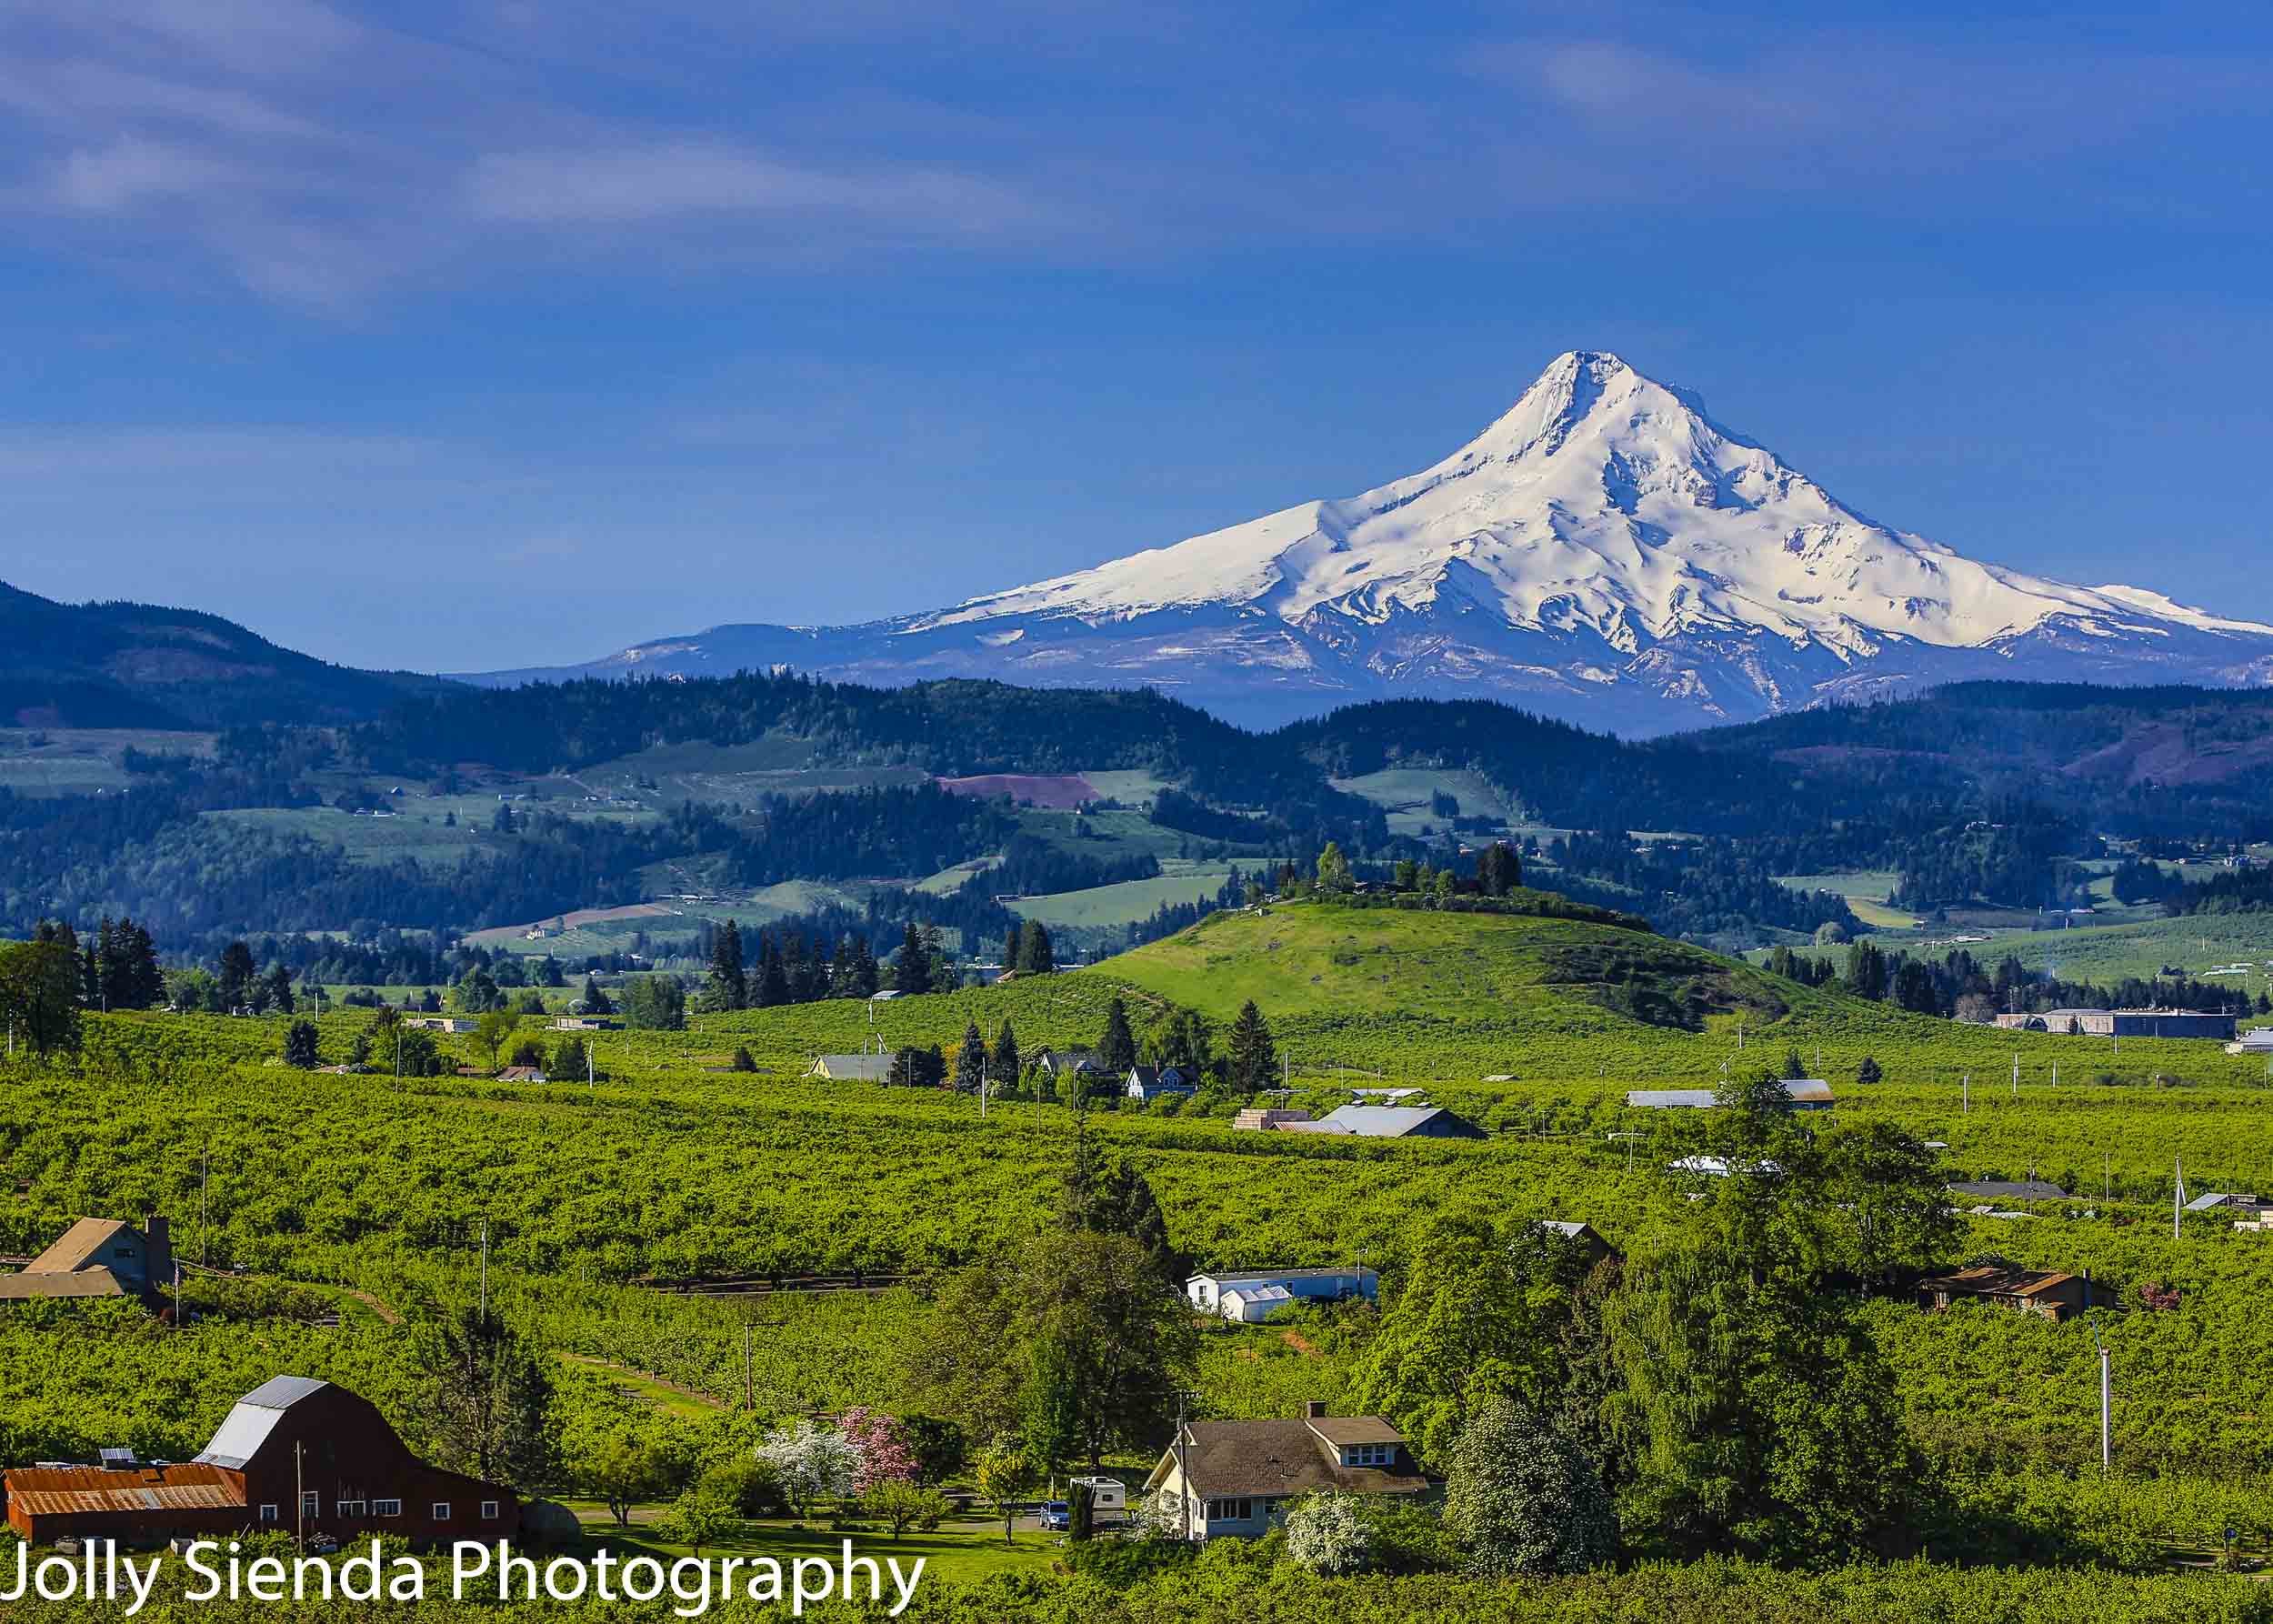 Snow Capped Mount Hood, Red Barn, Farms, and the Hood River Vall